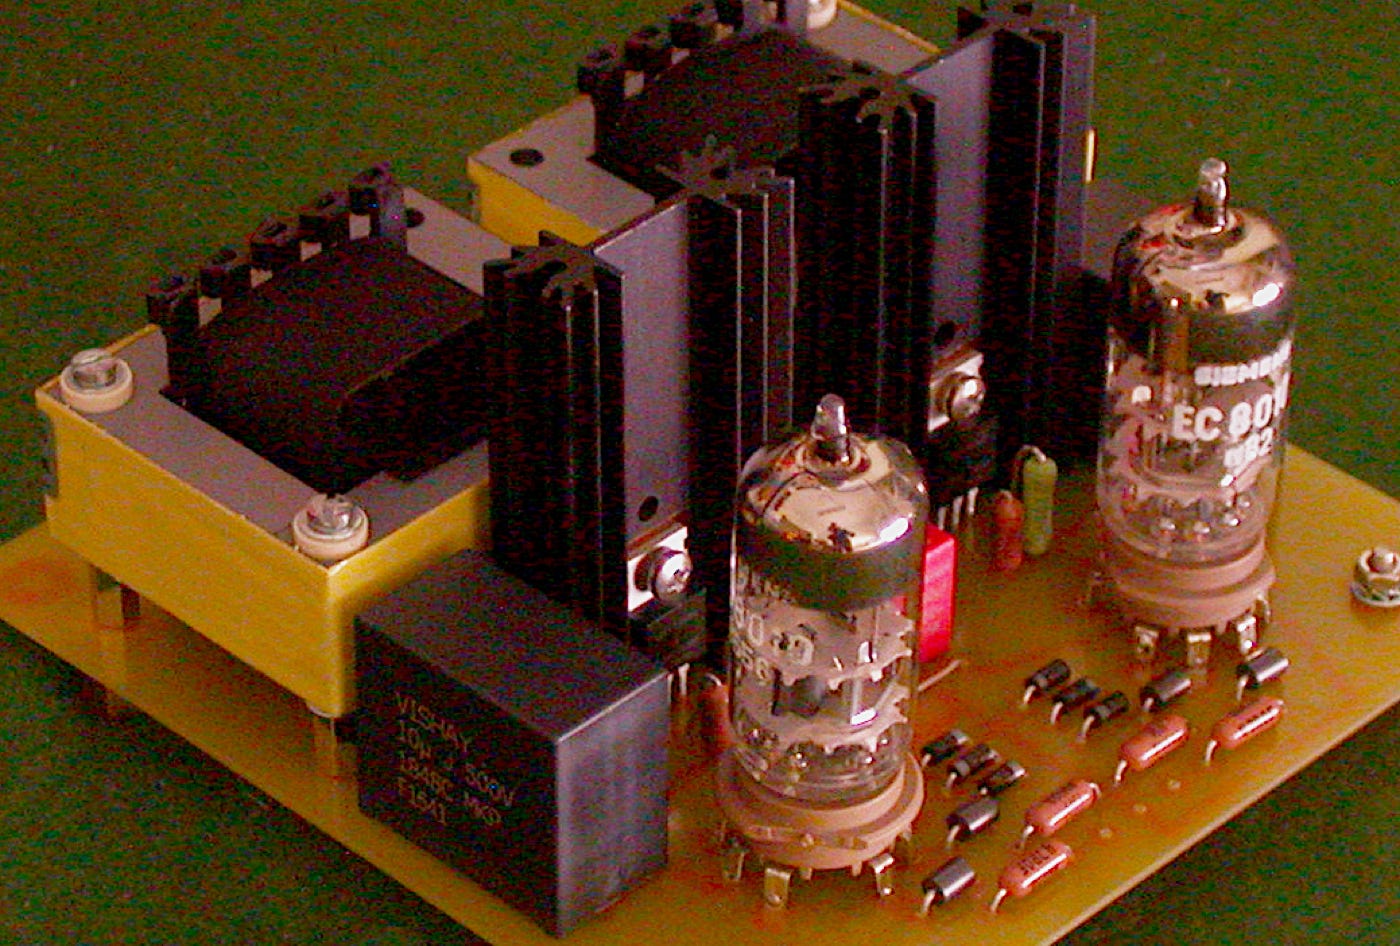 Preamplifier with EC8010 tubes.